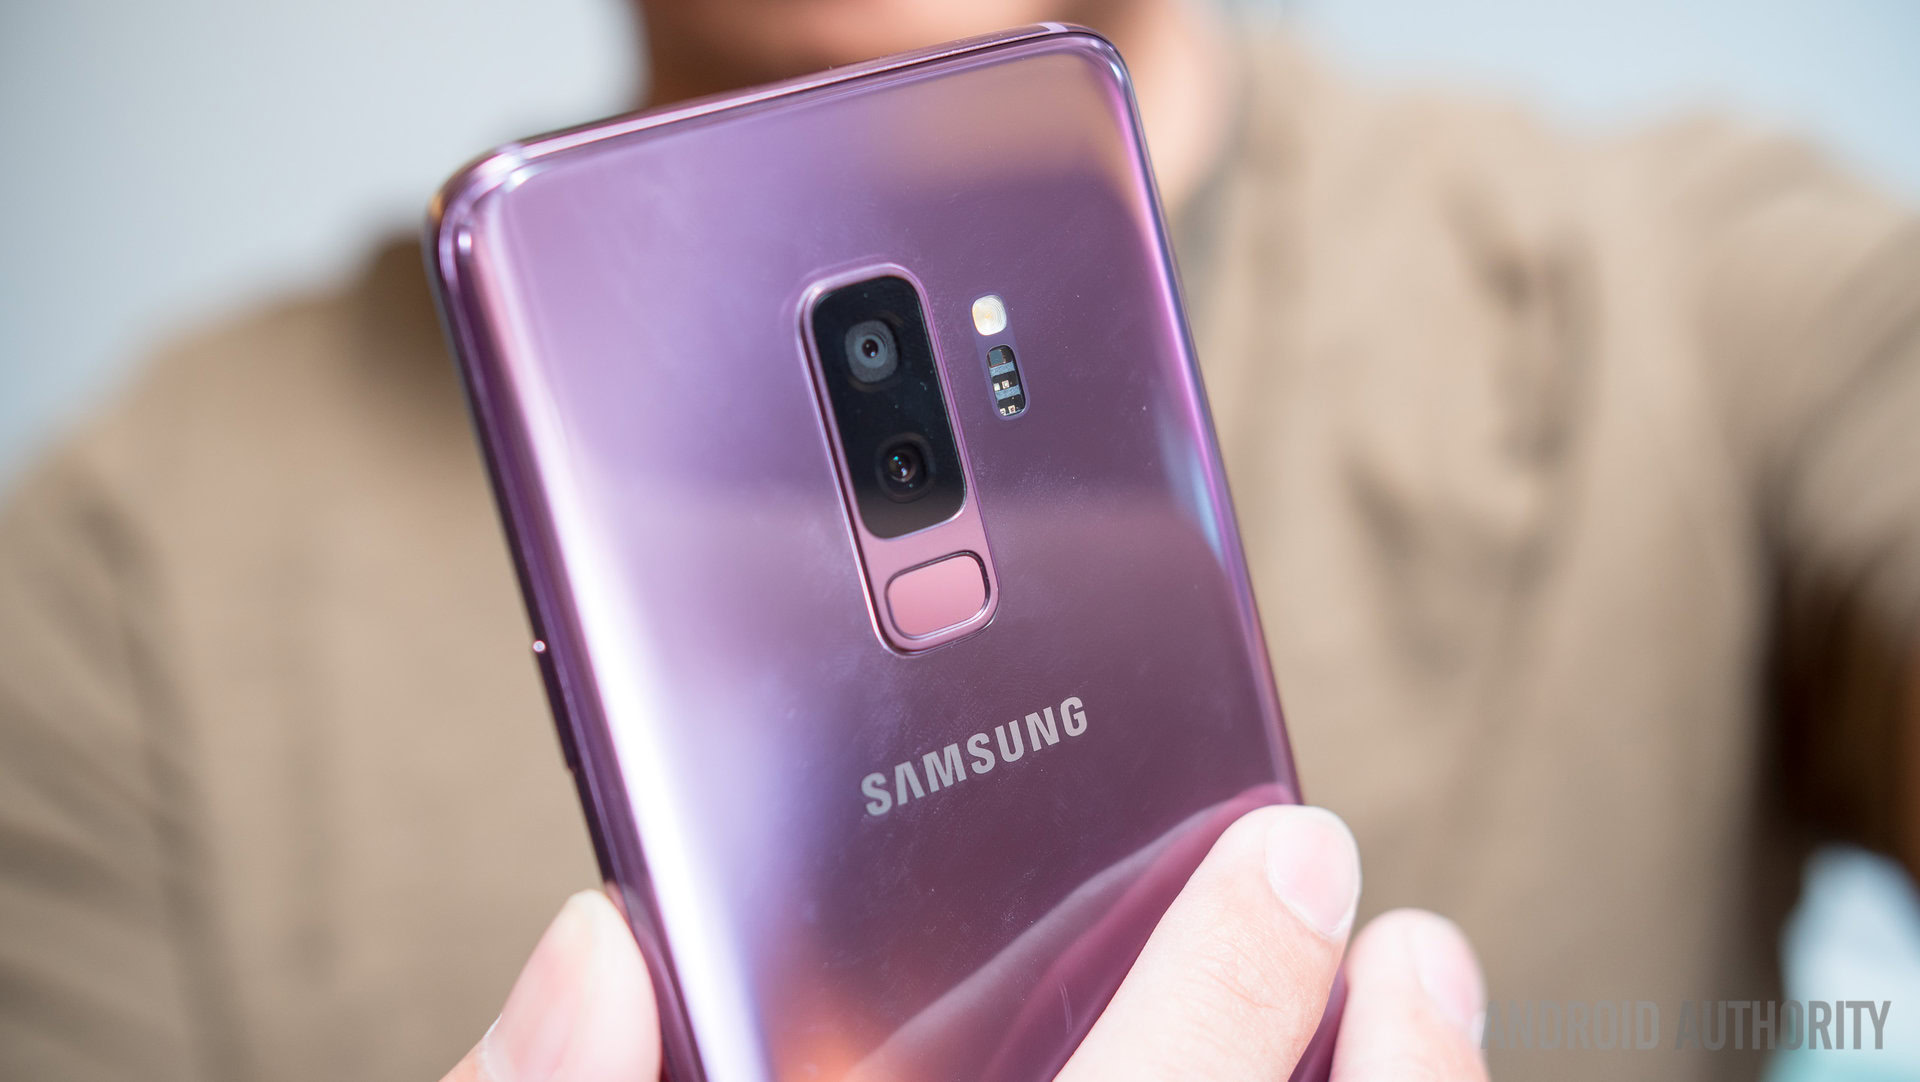 Samsung Galaxy S9 review: leader